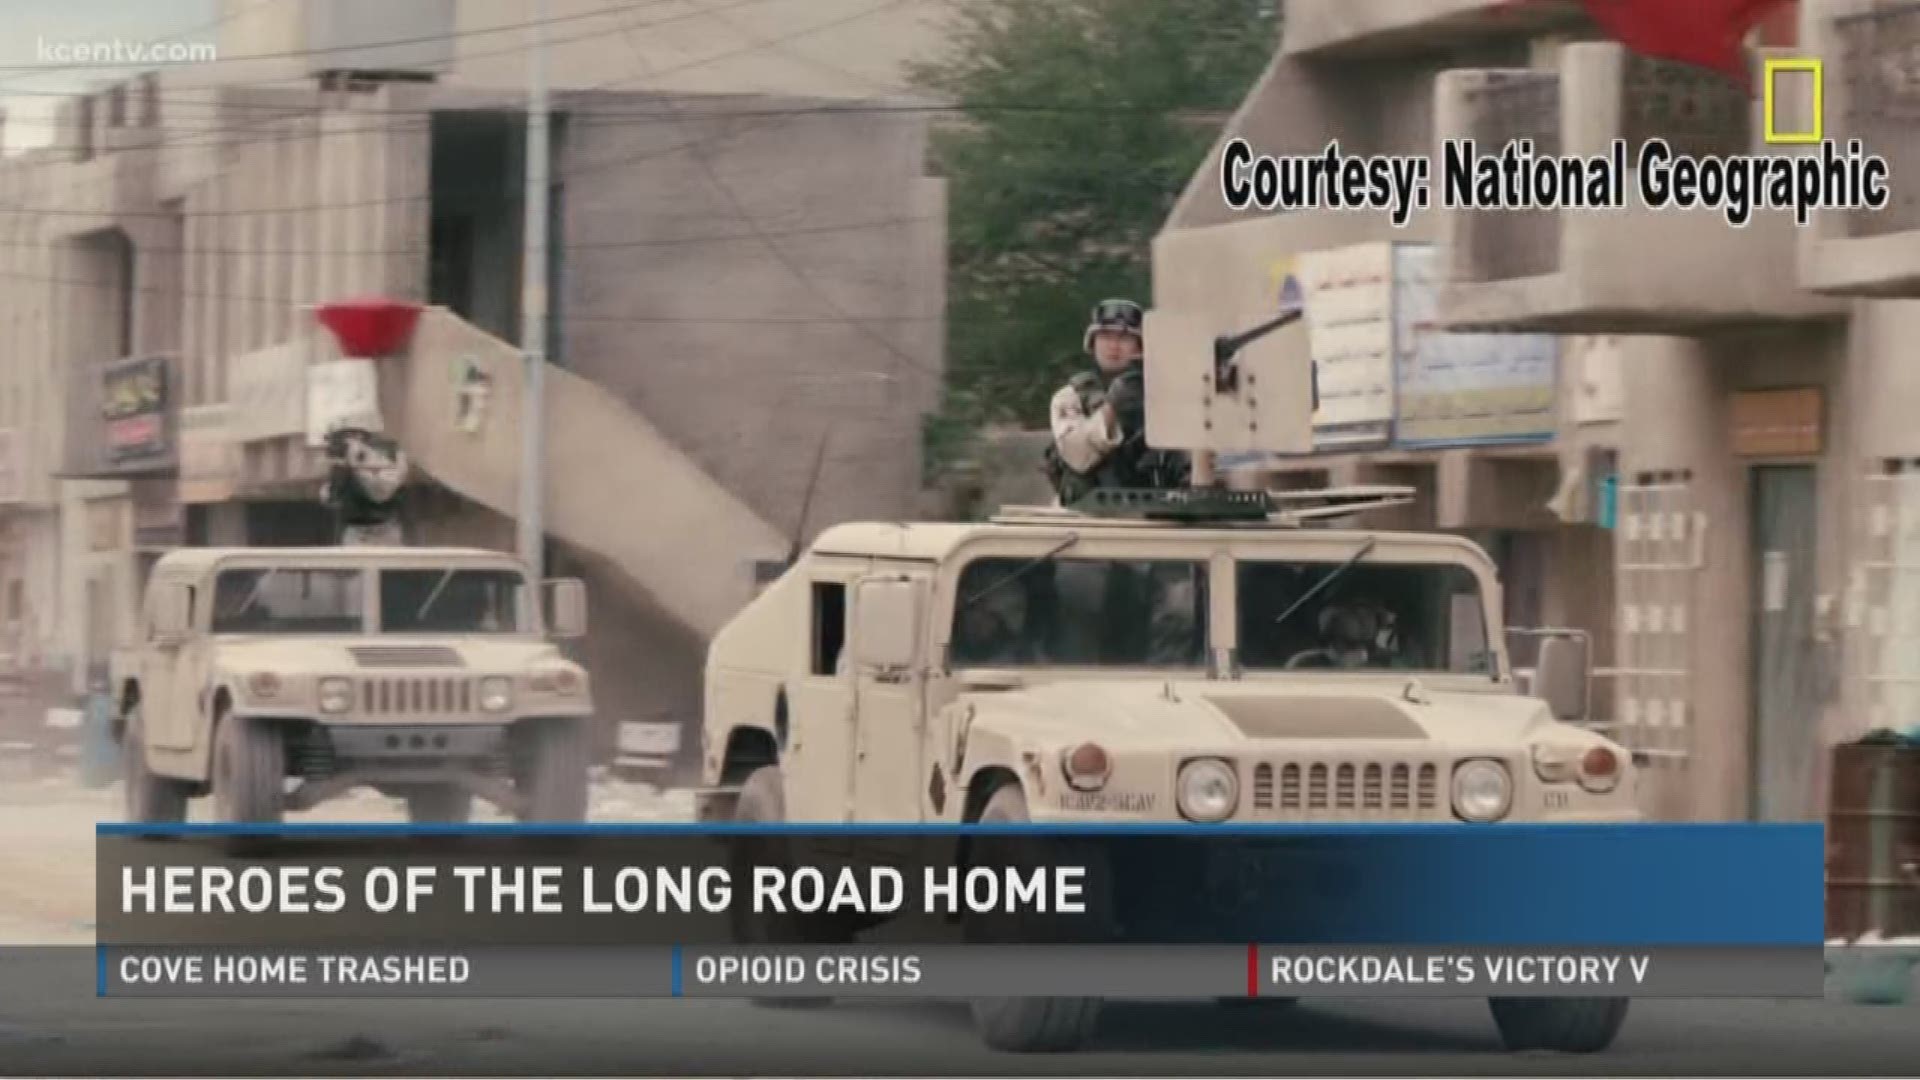 Channel 6 Evening Anchor Leslie Draffin talked with two soldiers whose tragic "Black Sunday" inspired National Geographic's mini-series "The Long Road Home."